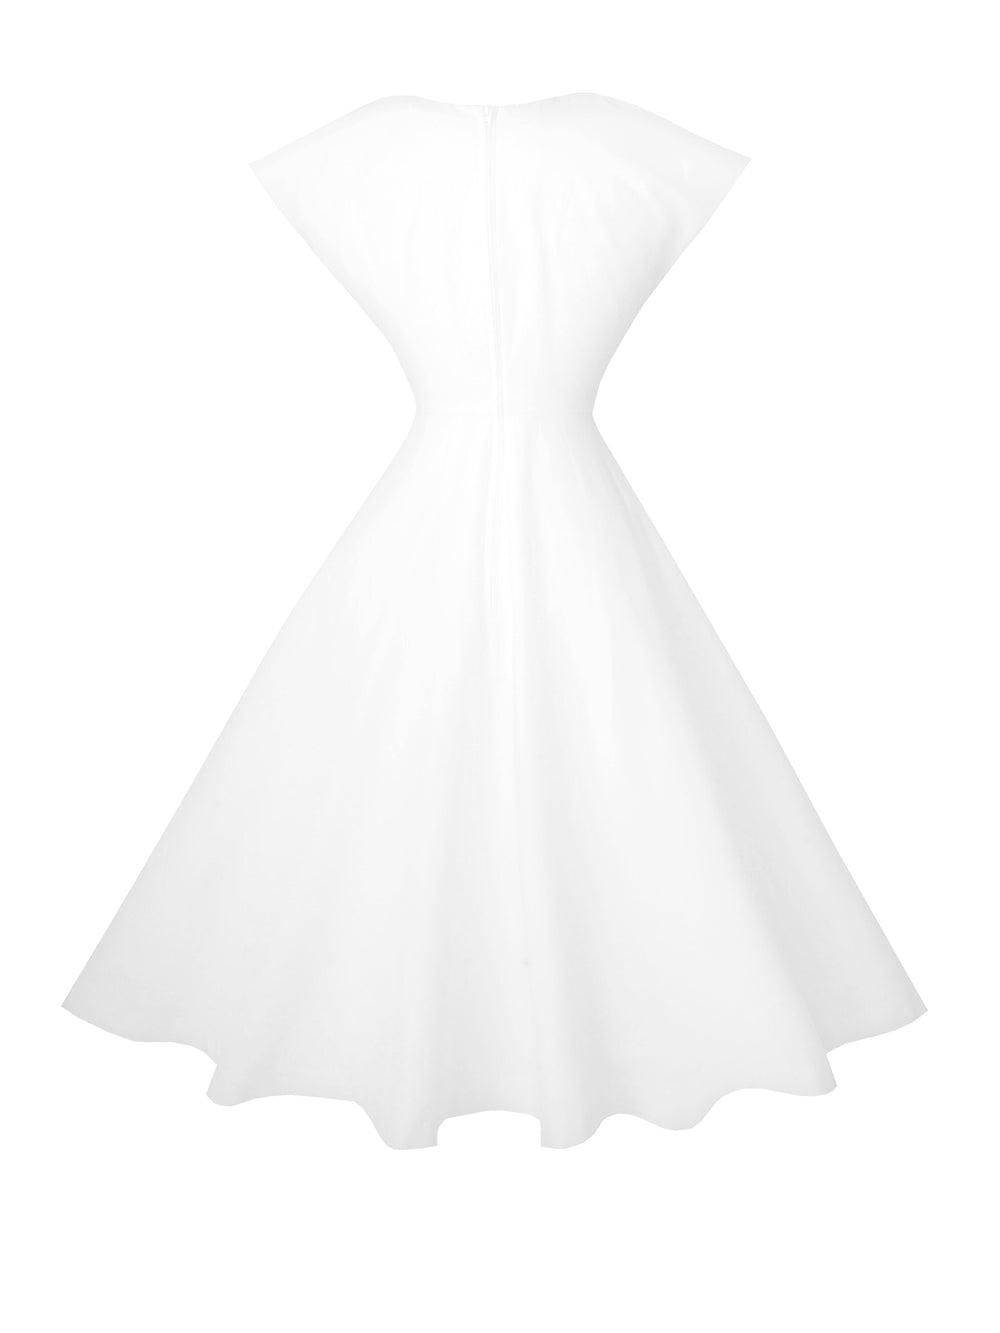 RTS - Size S - Kennedy Dress in White Cotton